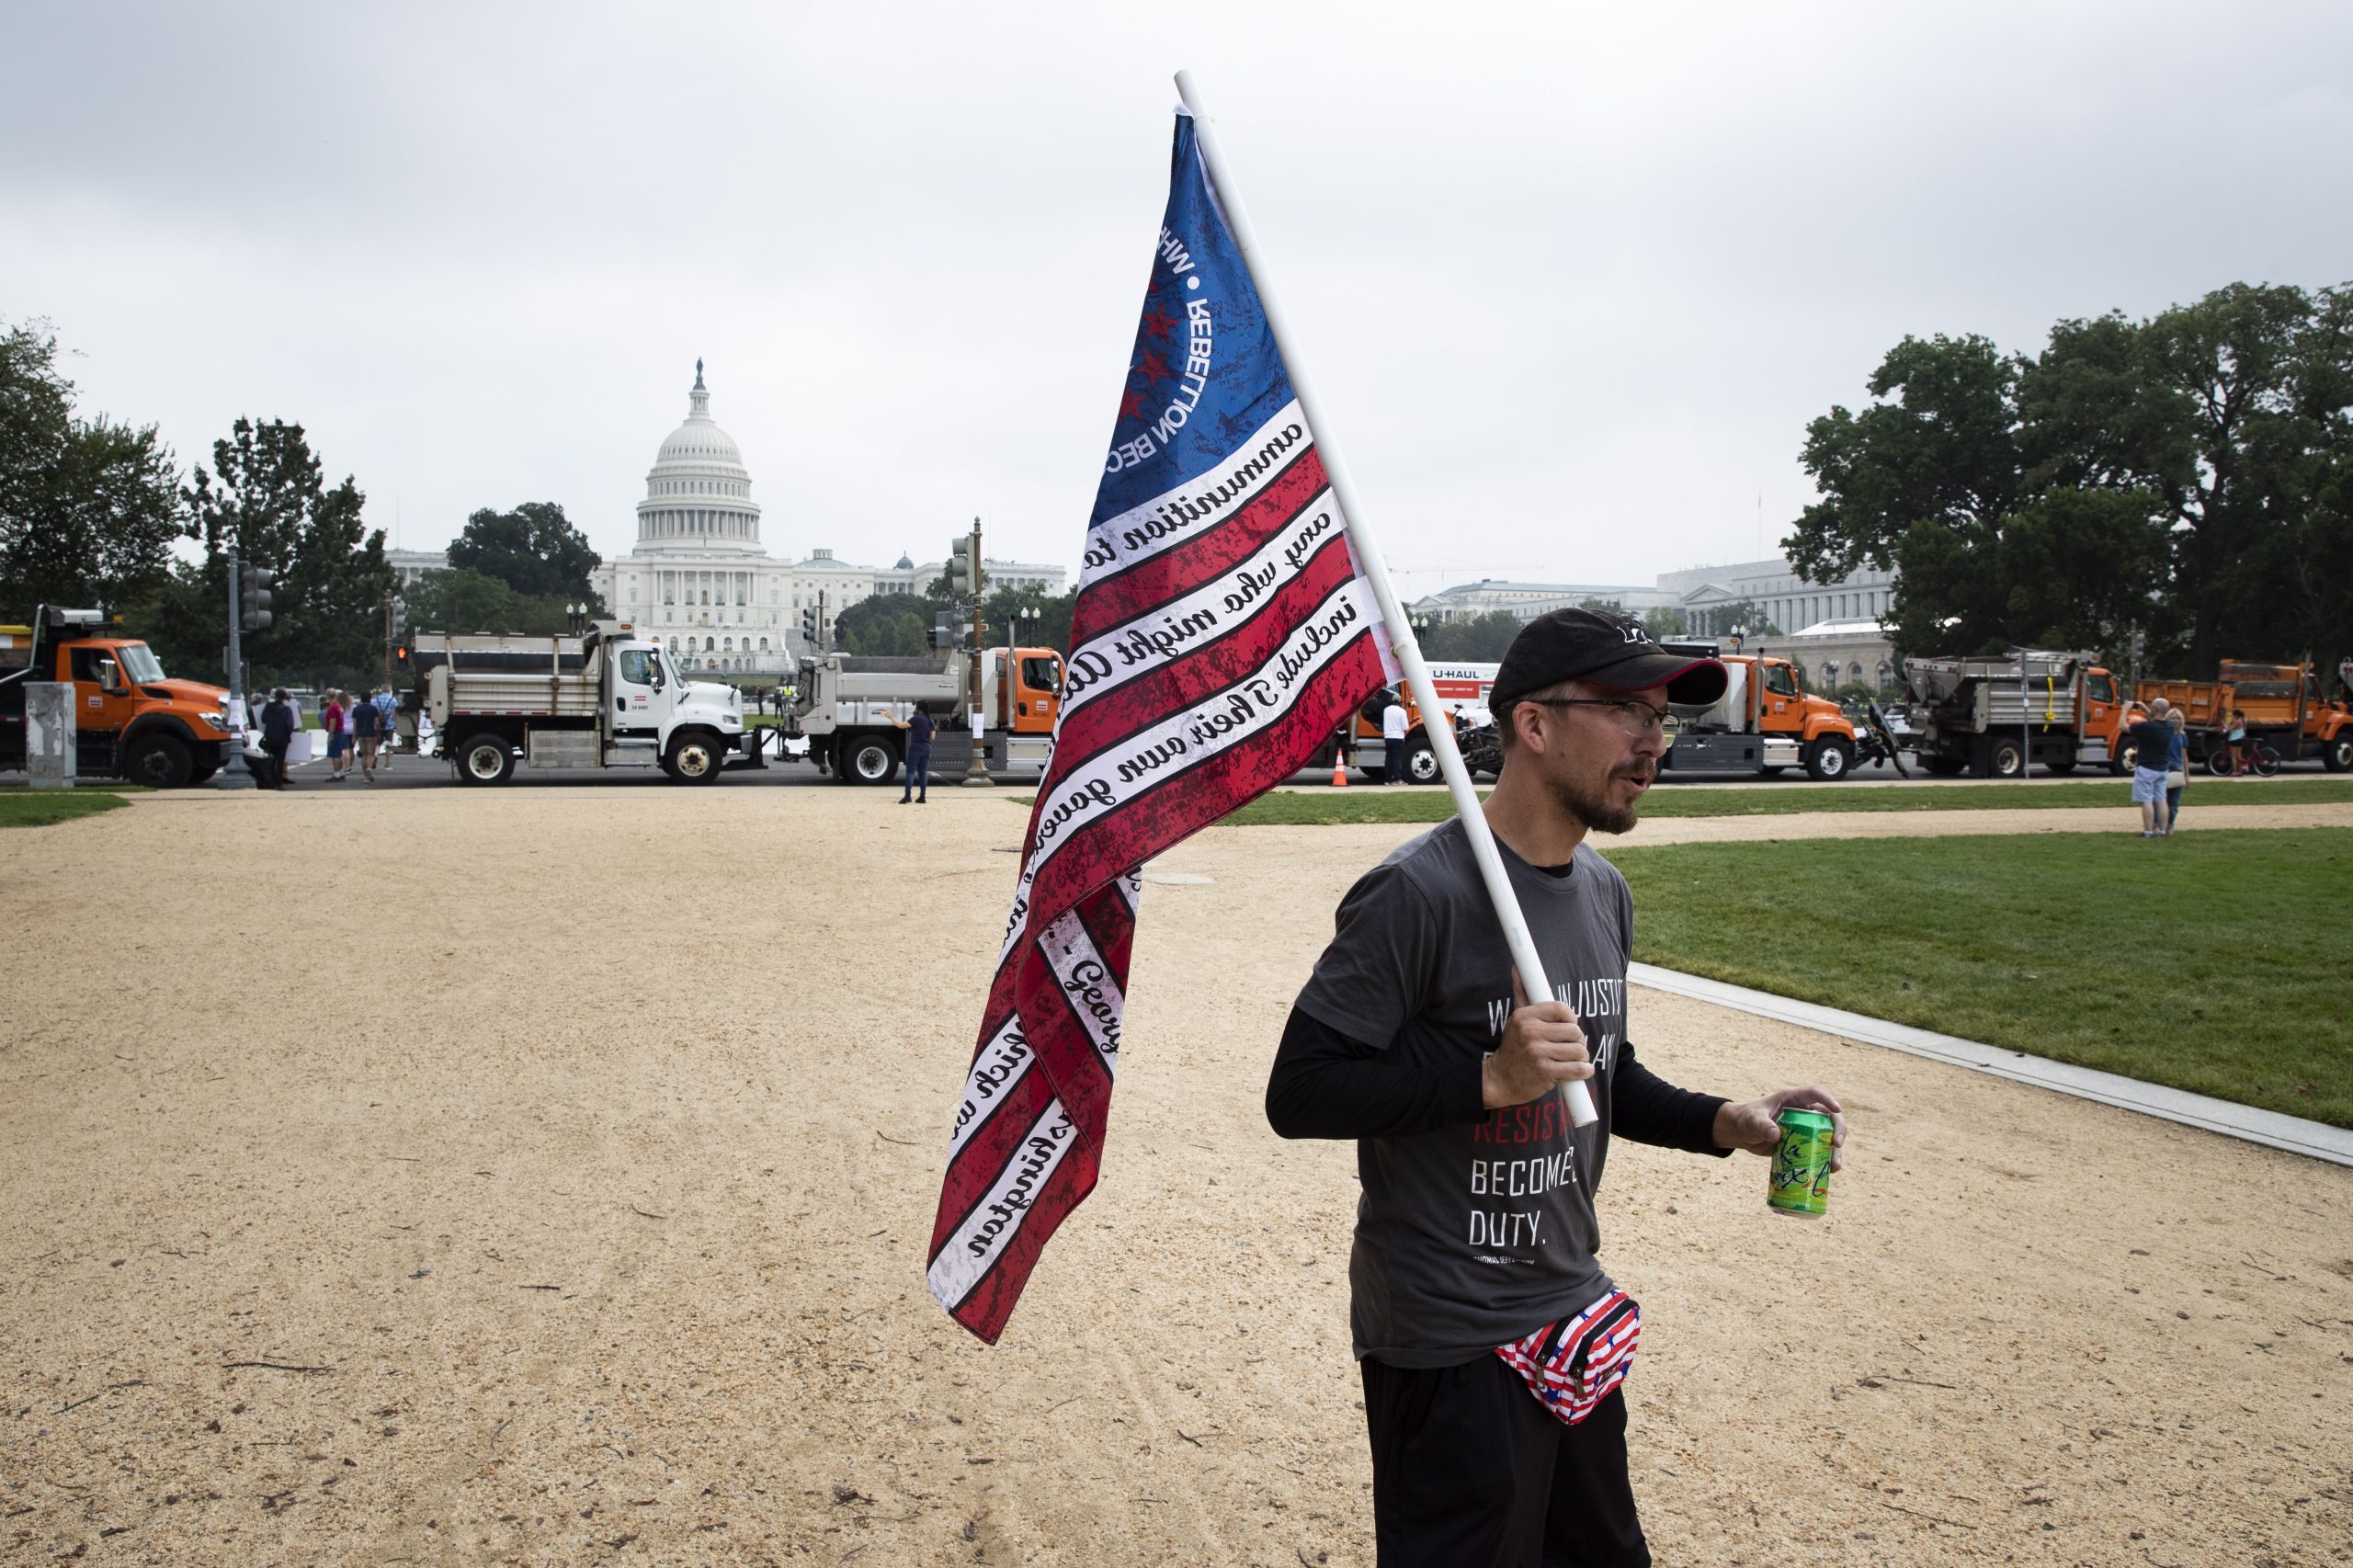 epa09475095 A supporter of the 'Justice for J6' protest carries a flag near the National Mall in front of trucks being used as a barricade by authorities as people begin to arrive for the 'Justice for J6' protest, on Capitol Hill in Washington, DC, USA, 18 September 2021. A protest called 'Justice for J6' has been planned to show support for people jailed for their role in the 06 January 2021 attack on the Capitol.  EPA/MICHAEL REYNOLDS